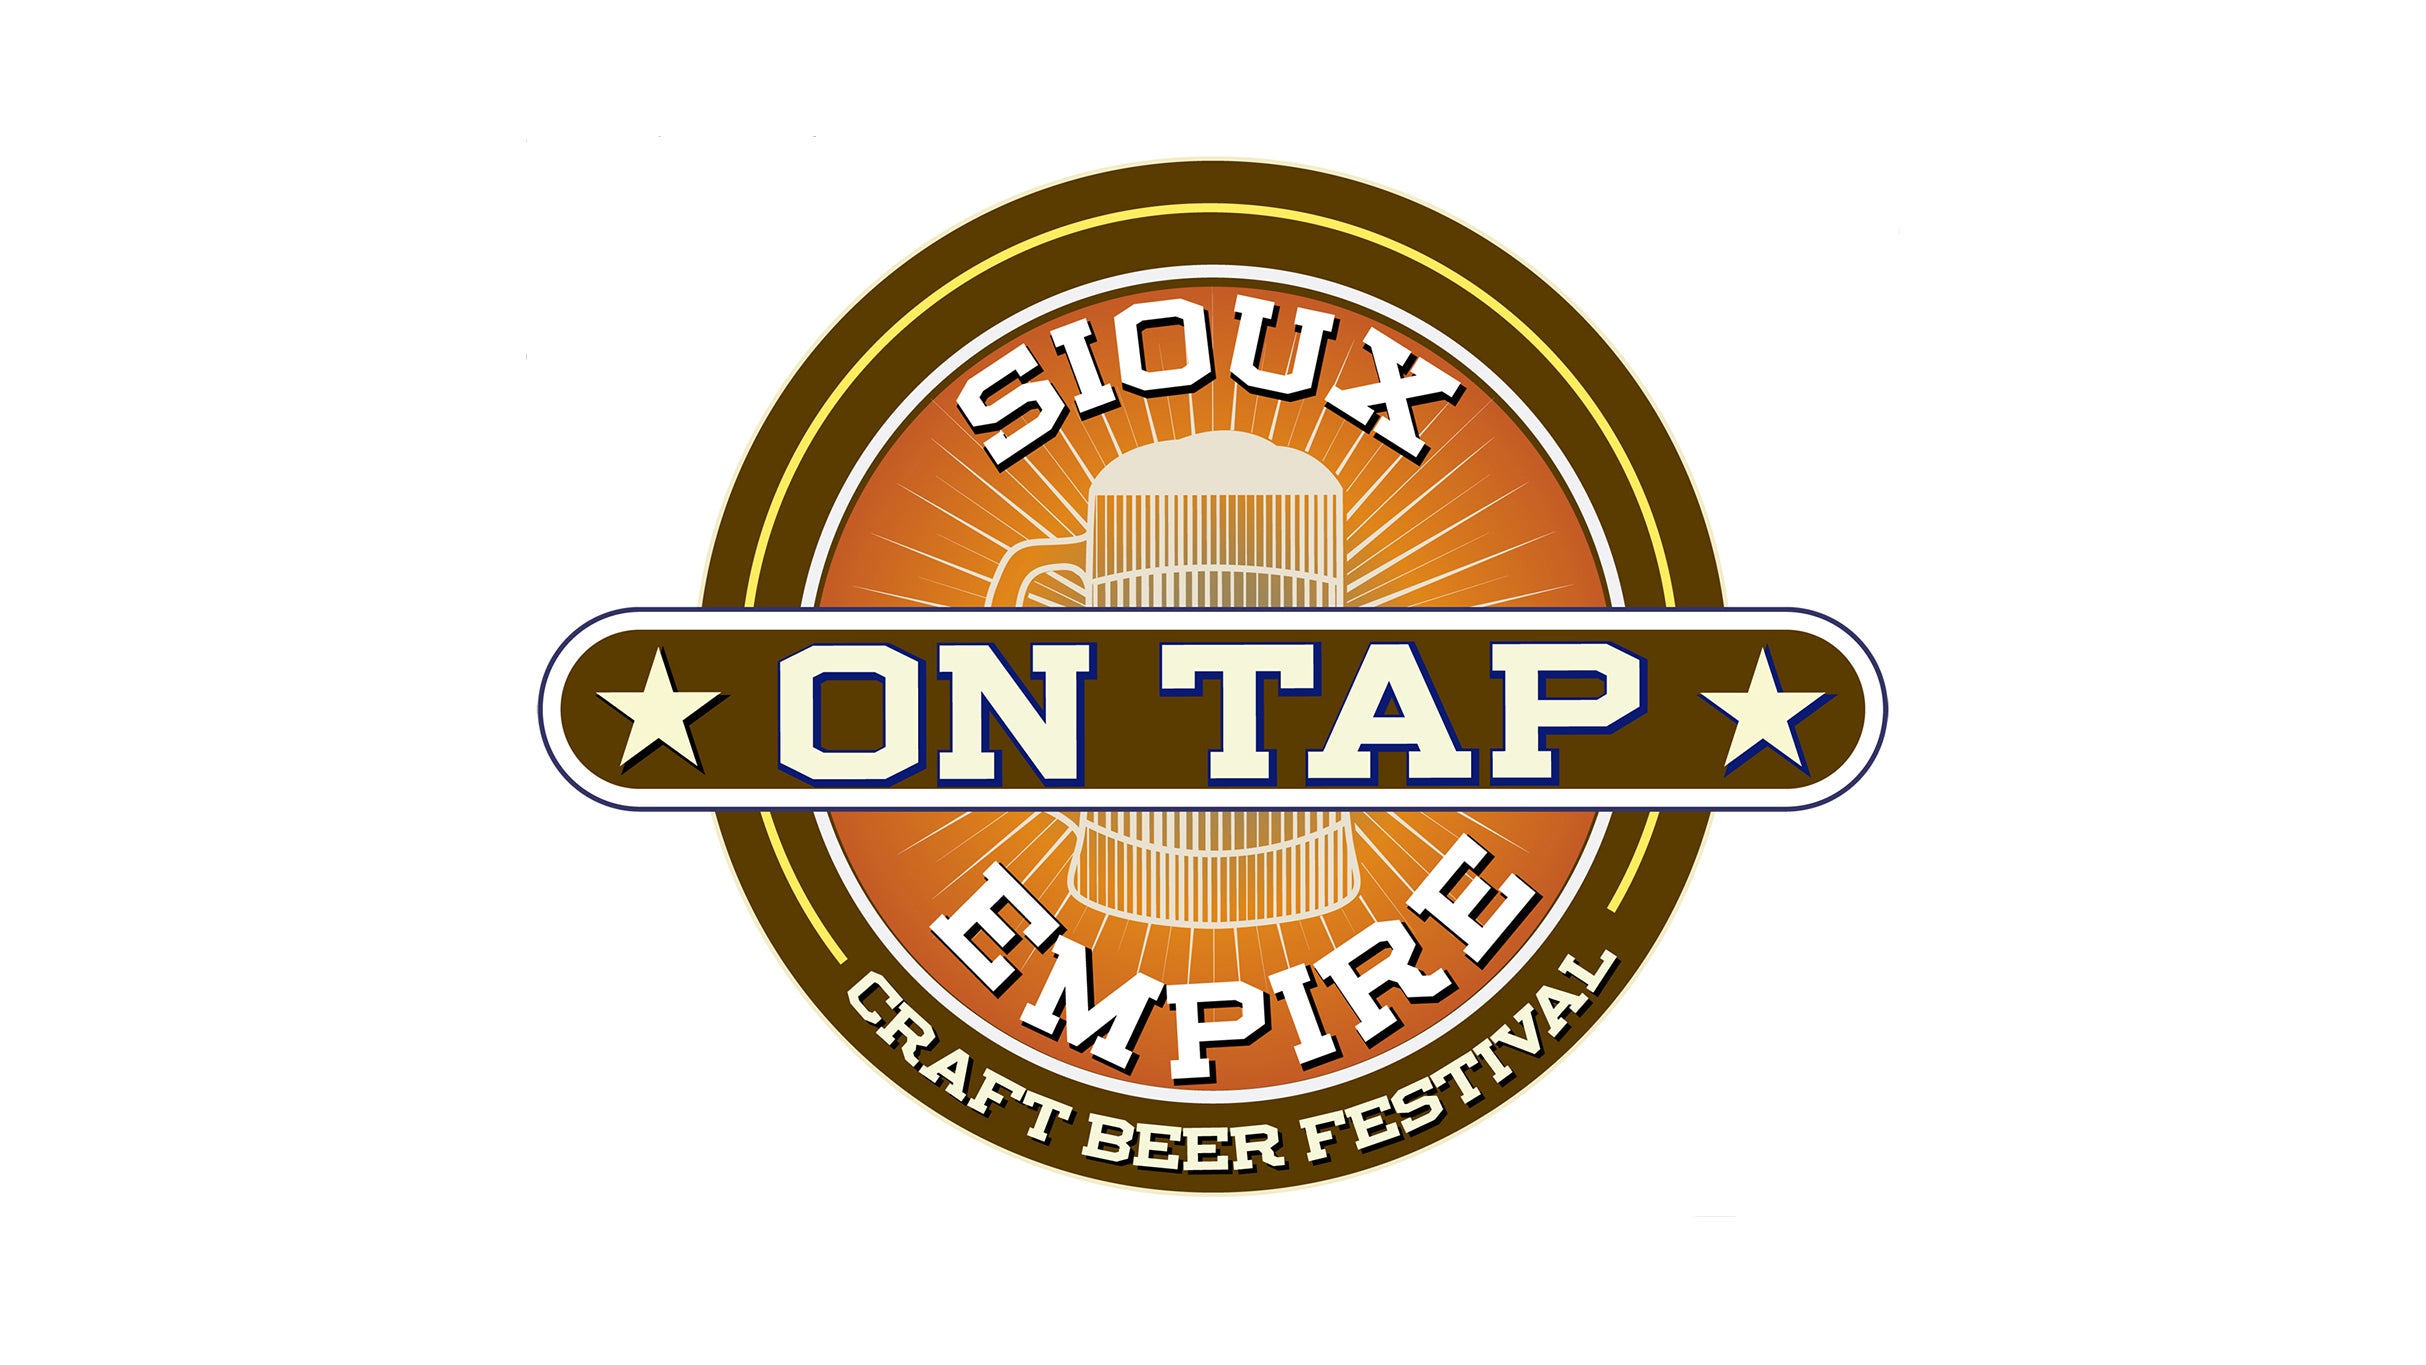 Sioux Empire On Tap in Sioux Falls promo photo for Tier 1 Pricing presale offer code